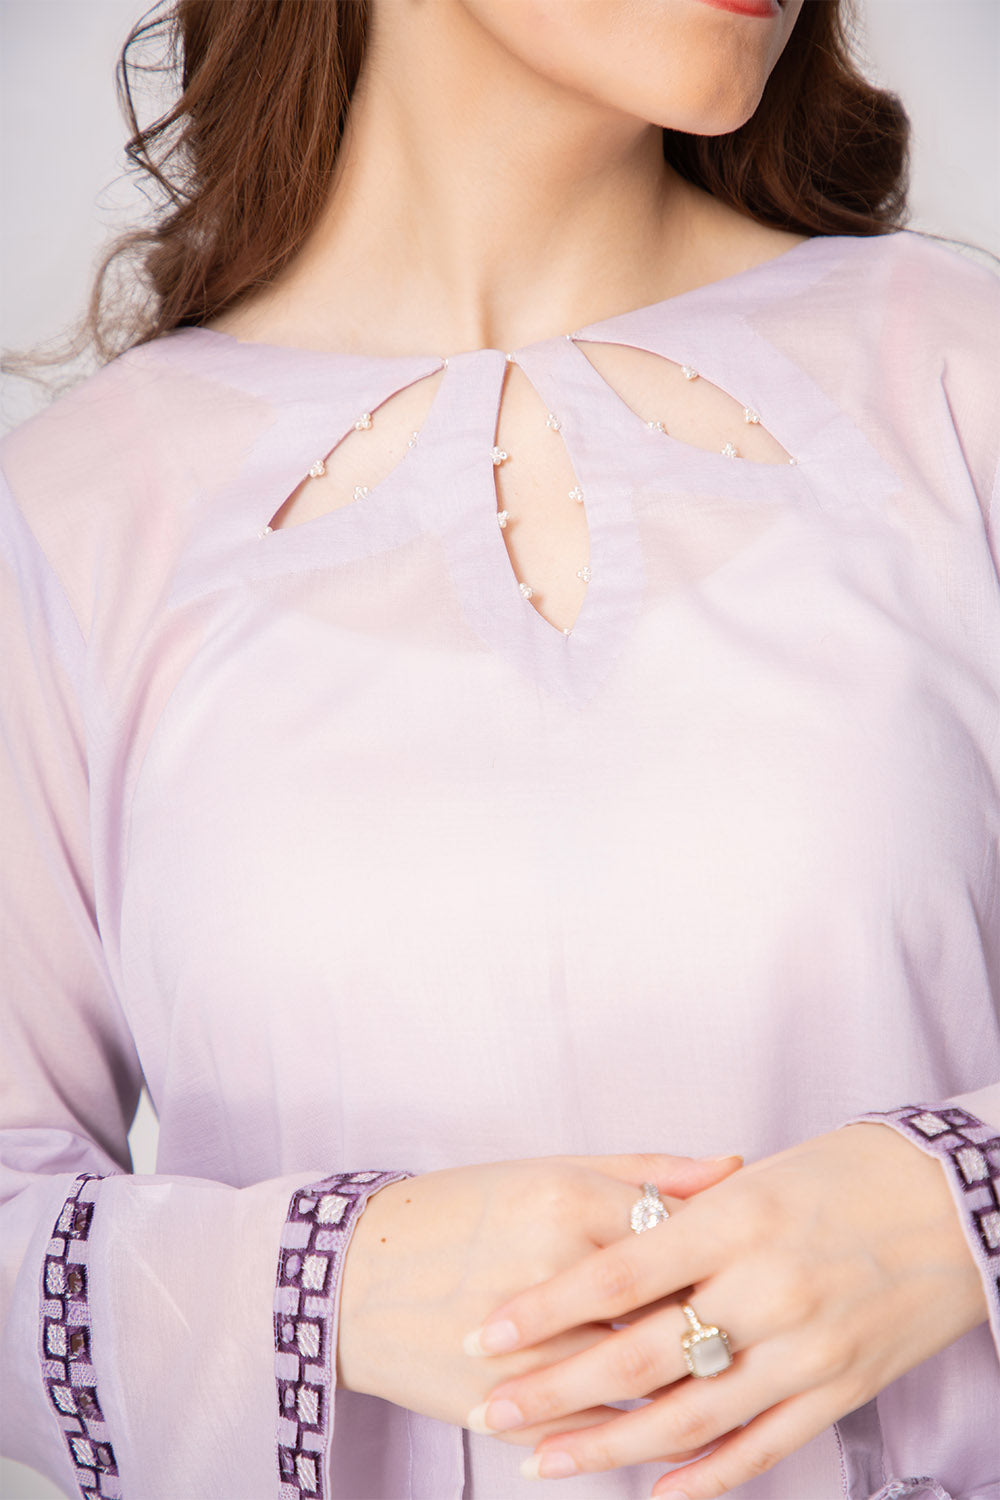 Lavender - Embroidered Shirt